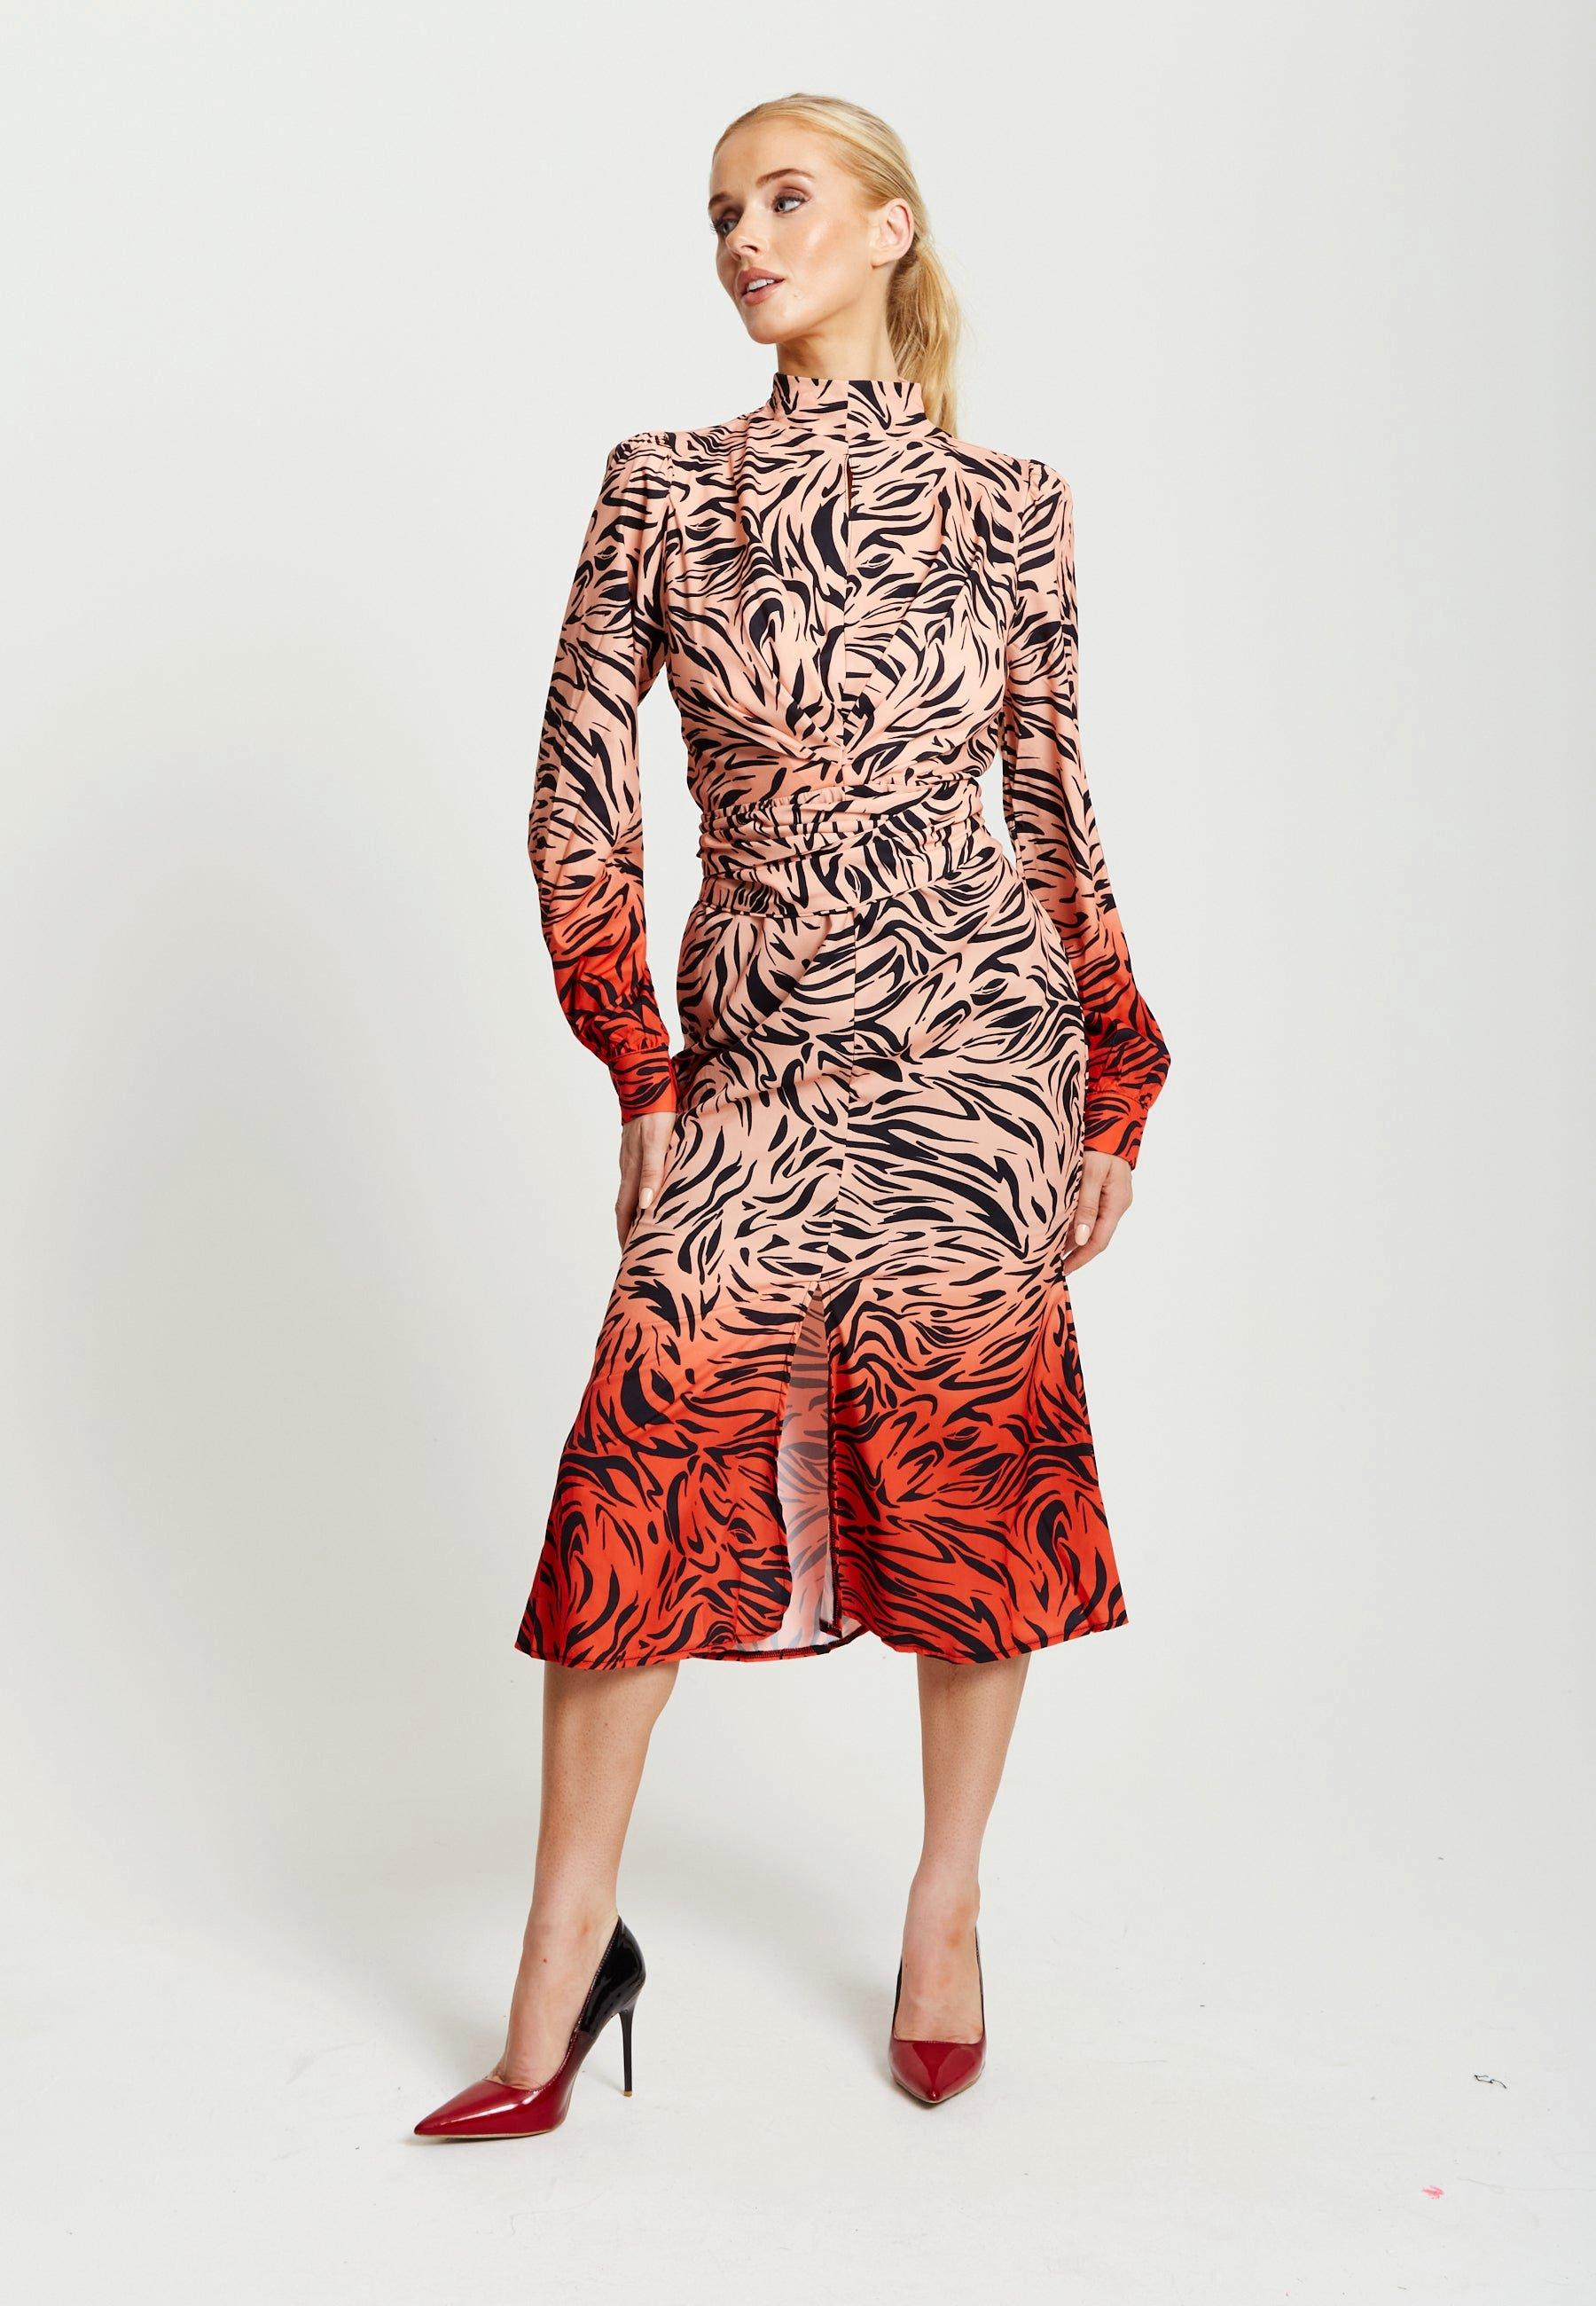 Zebra Print Midi Dress With High Neck And Draped Waist Detail In Orange And Nude